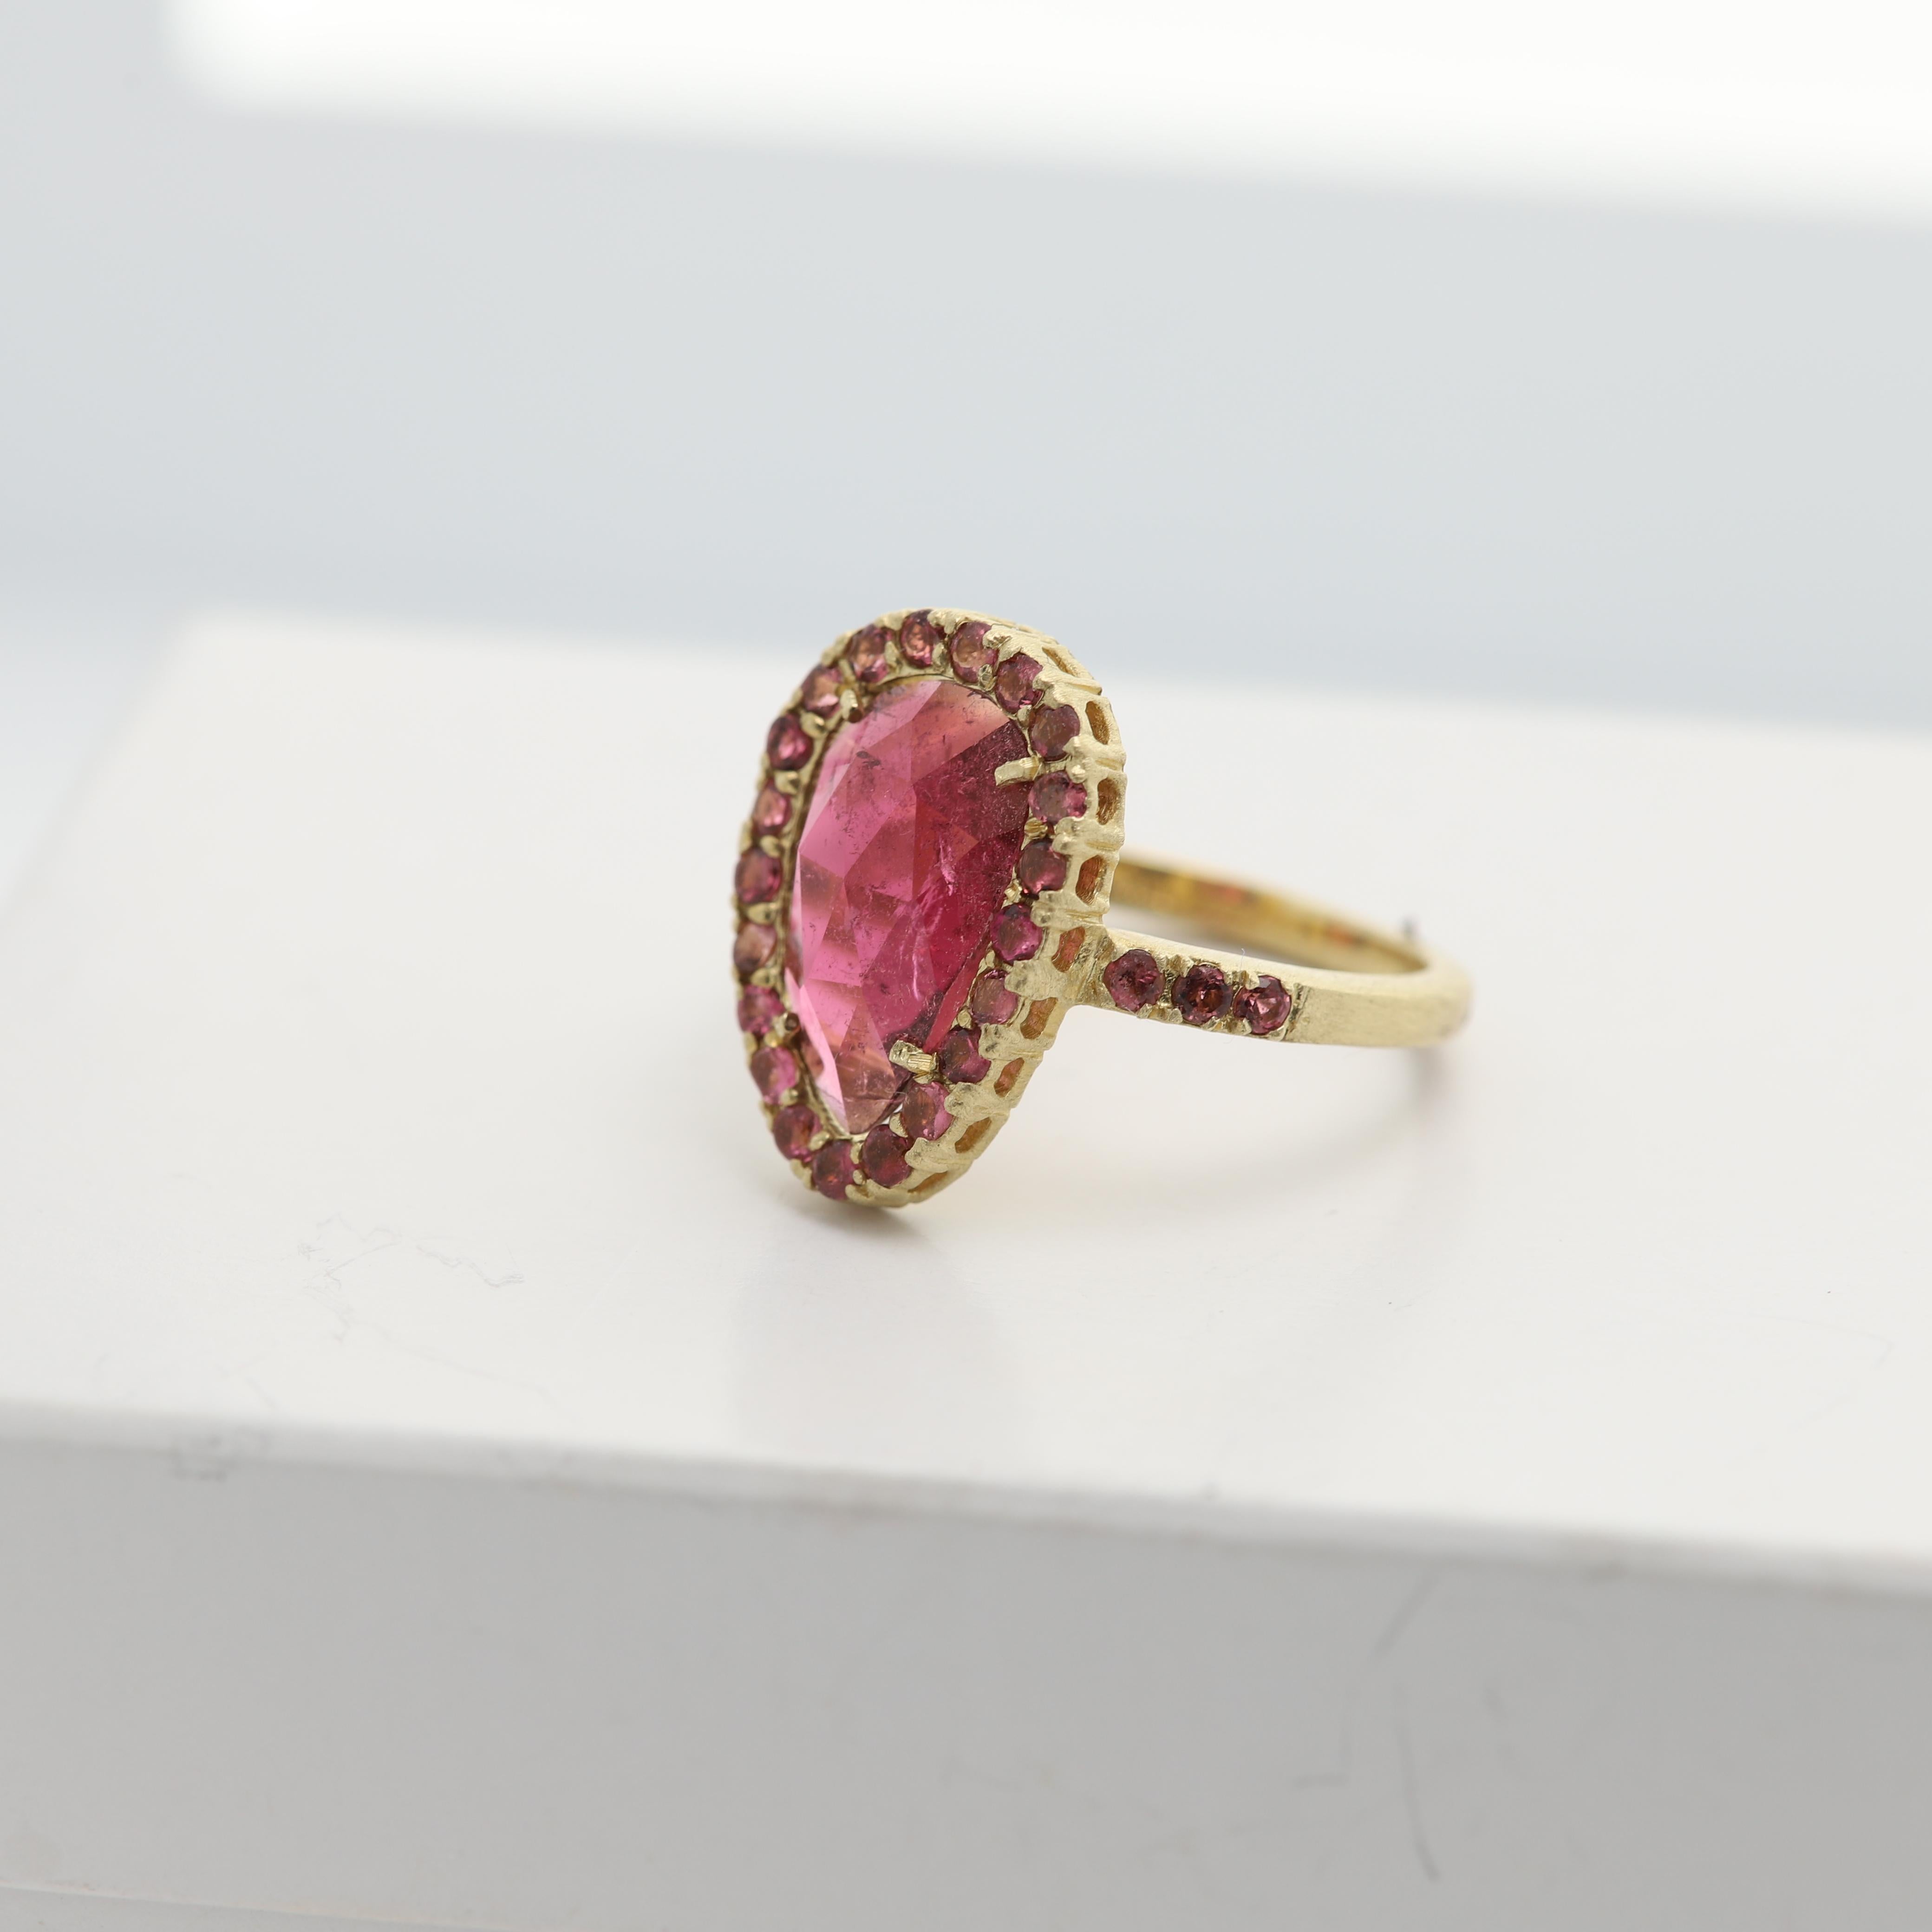 Vintage Pink Tourmaline Ring - Hand Made in Italy
14k Yellow Gold 4.80 grams - mat finish (not shiney gold)
Small Round Pink Tourmaline arround on the sides 0.58 carat 
Center is a 